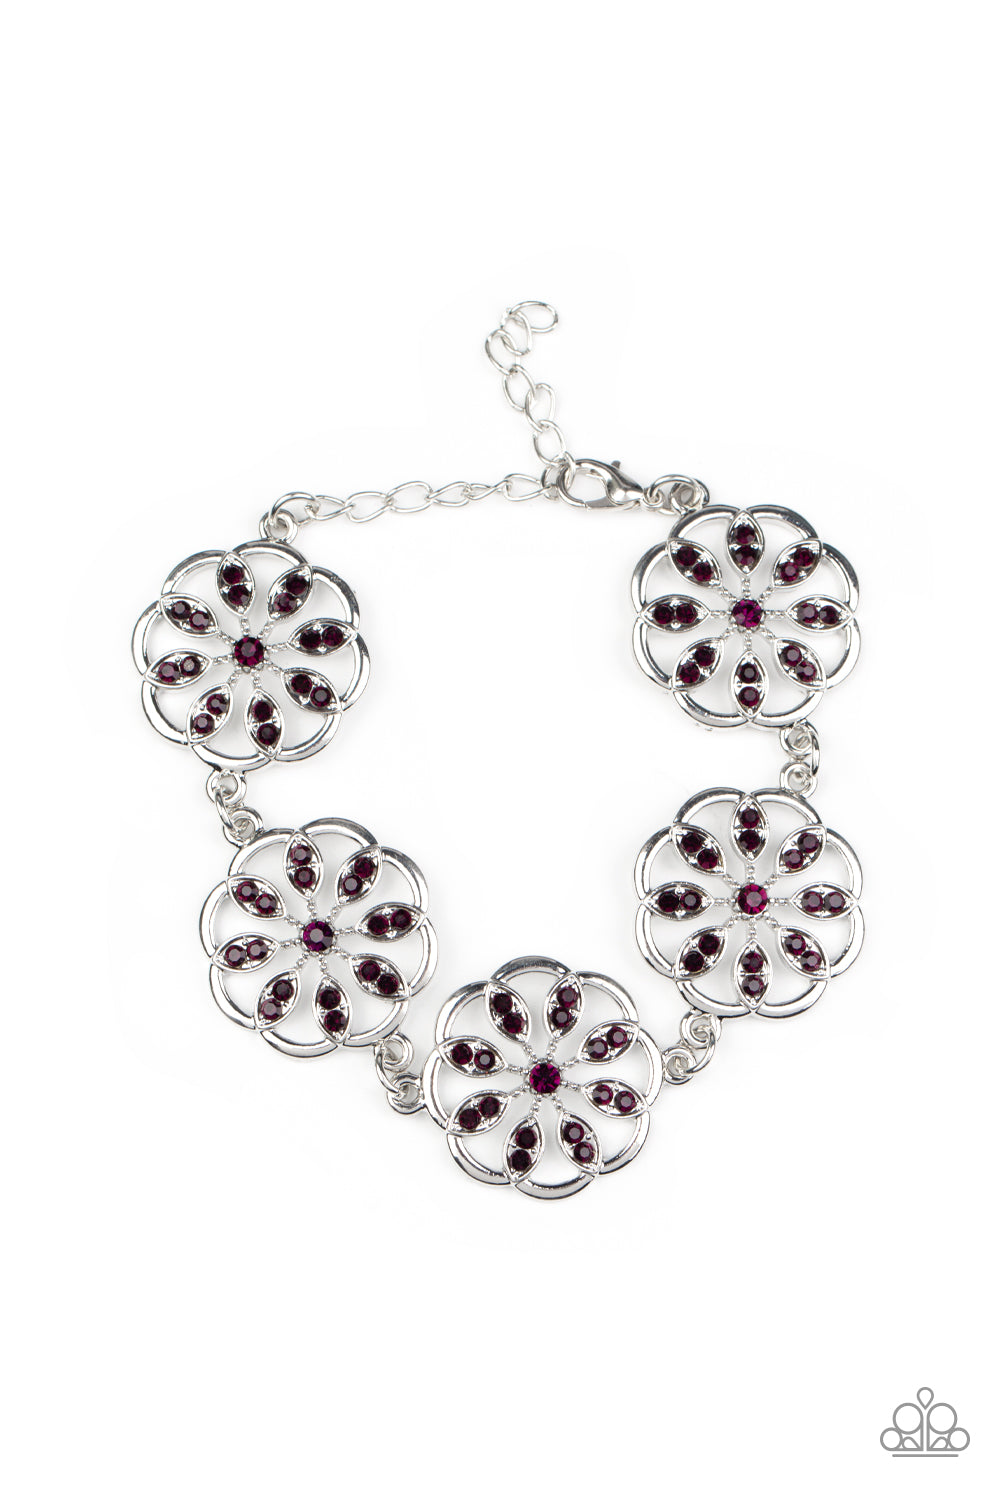 Blooming Bling Purple Bracelet - Paparazzi Accessories  Adorned with purple rhinestone floral accents, scalloped silver frames delicately link around the wrist for a sparkly seasonal fashion. Features an adjustable clasp closure.  All Paparazzi Accessories are lead free and nickel free!  Sold as one individual bracelet.